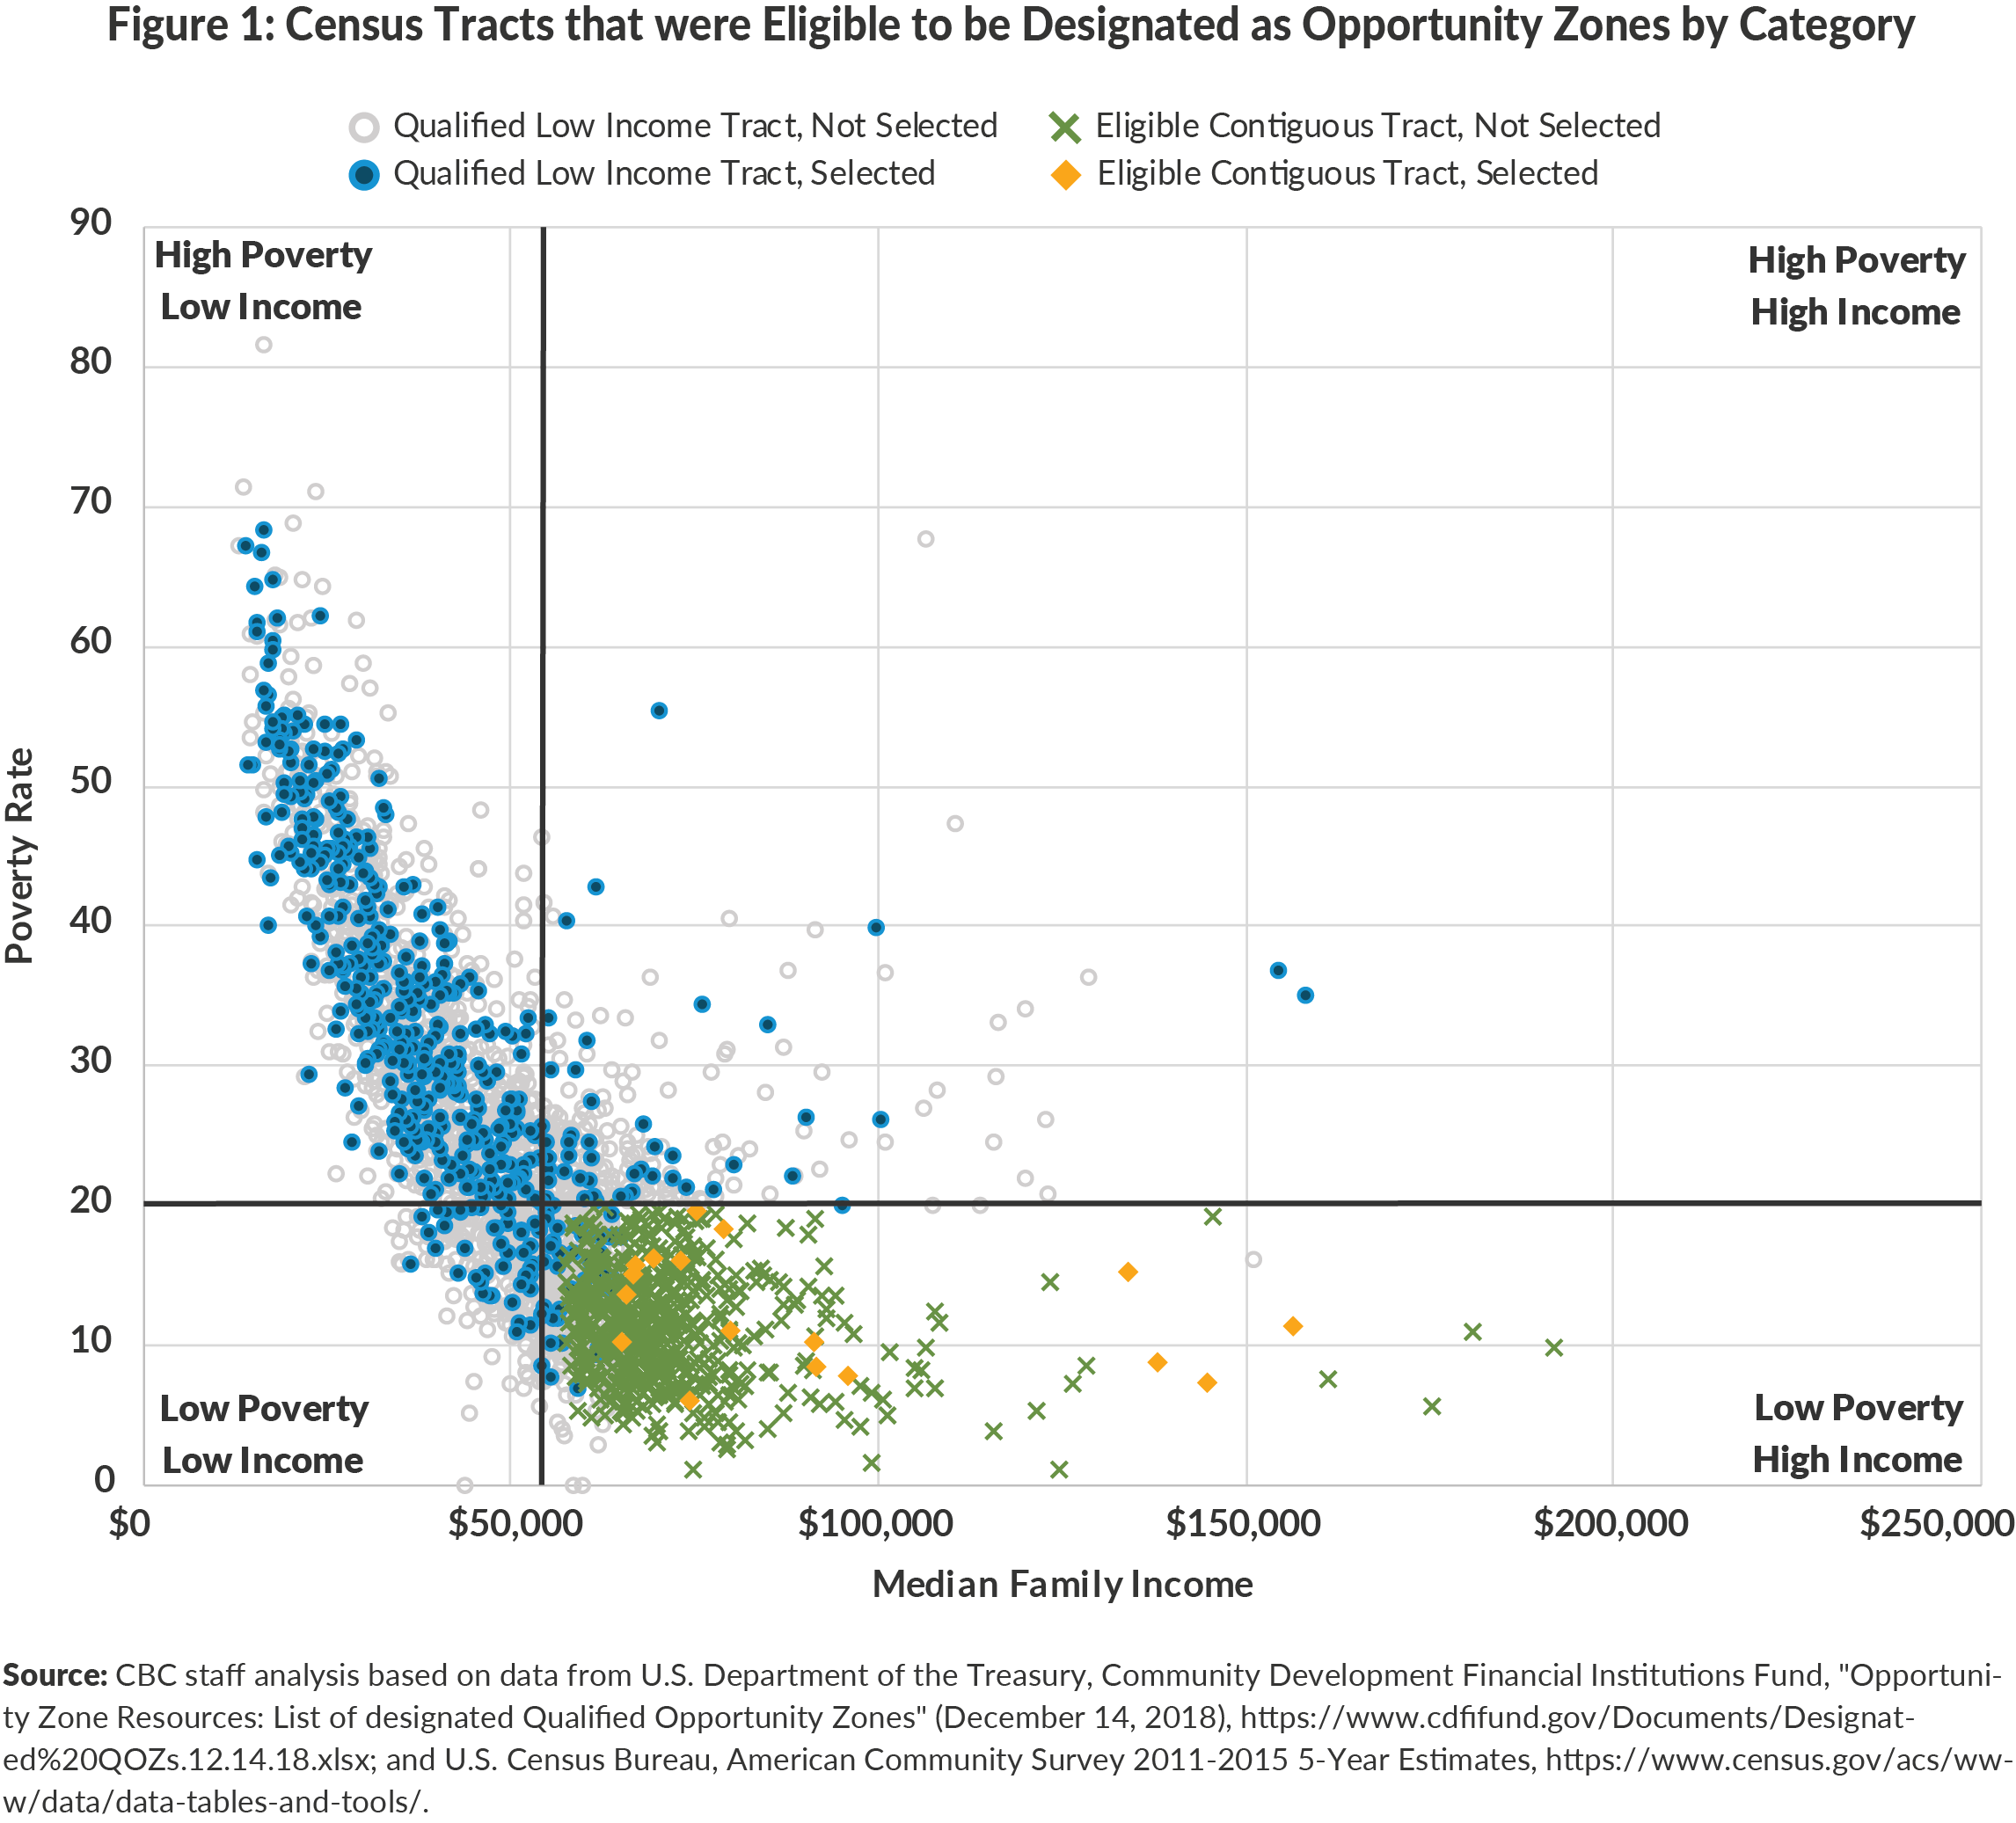 Figure 1. Census Tracts that were Eligible to be Designated as Opportunity Zones by Category